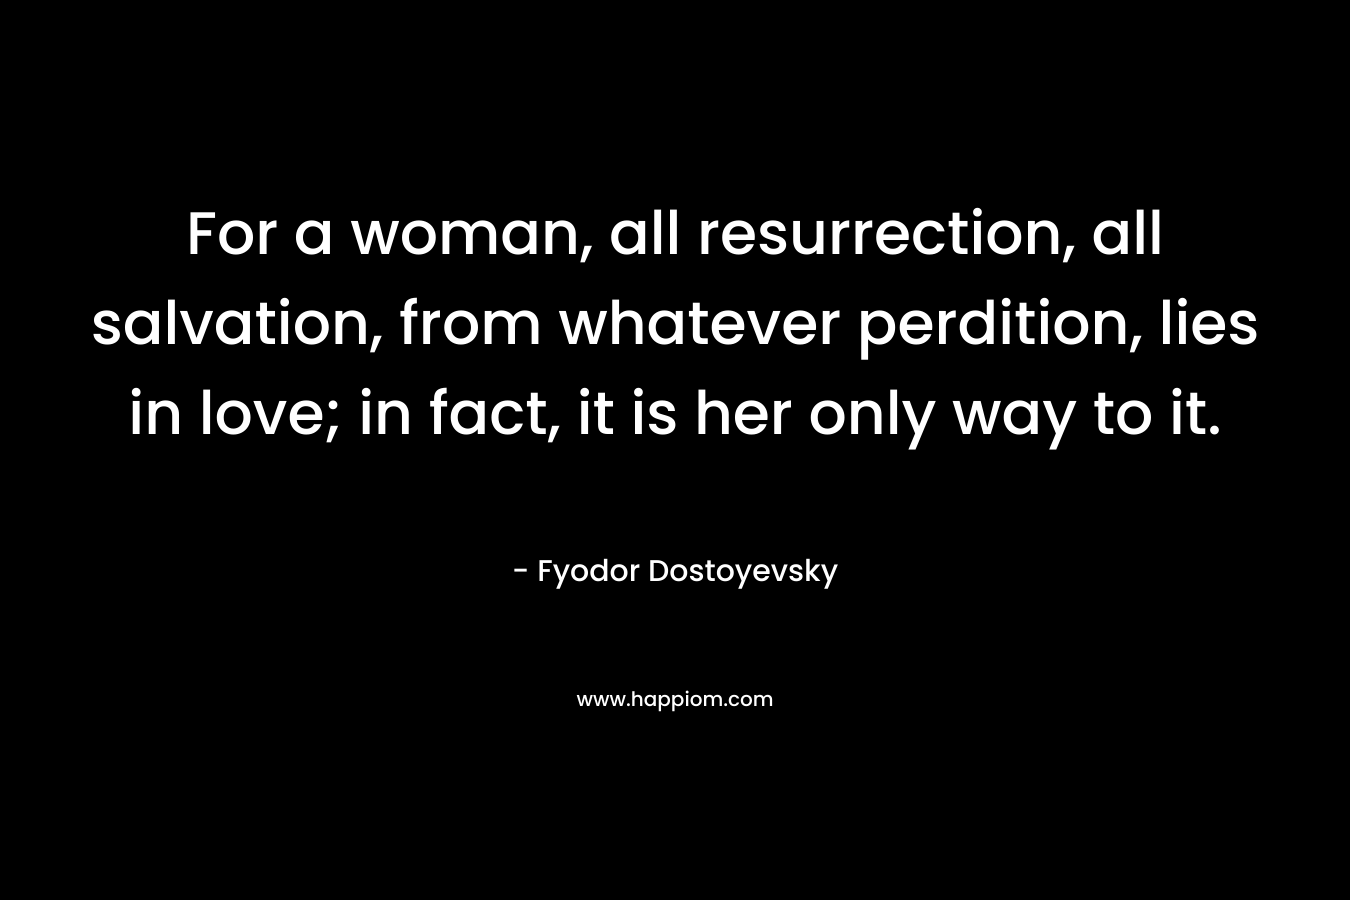 For a woman, all resurrection, all salvation, from whatever perdition, lies in love; in fact, it is her only way to it. – Fyodor Dostoyevsky